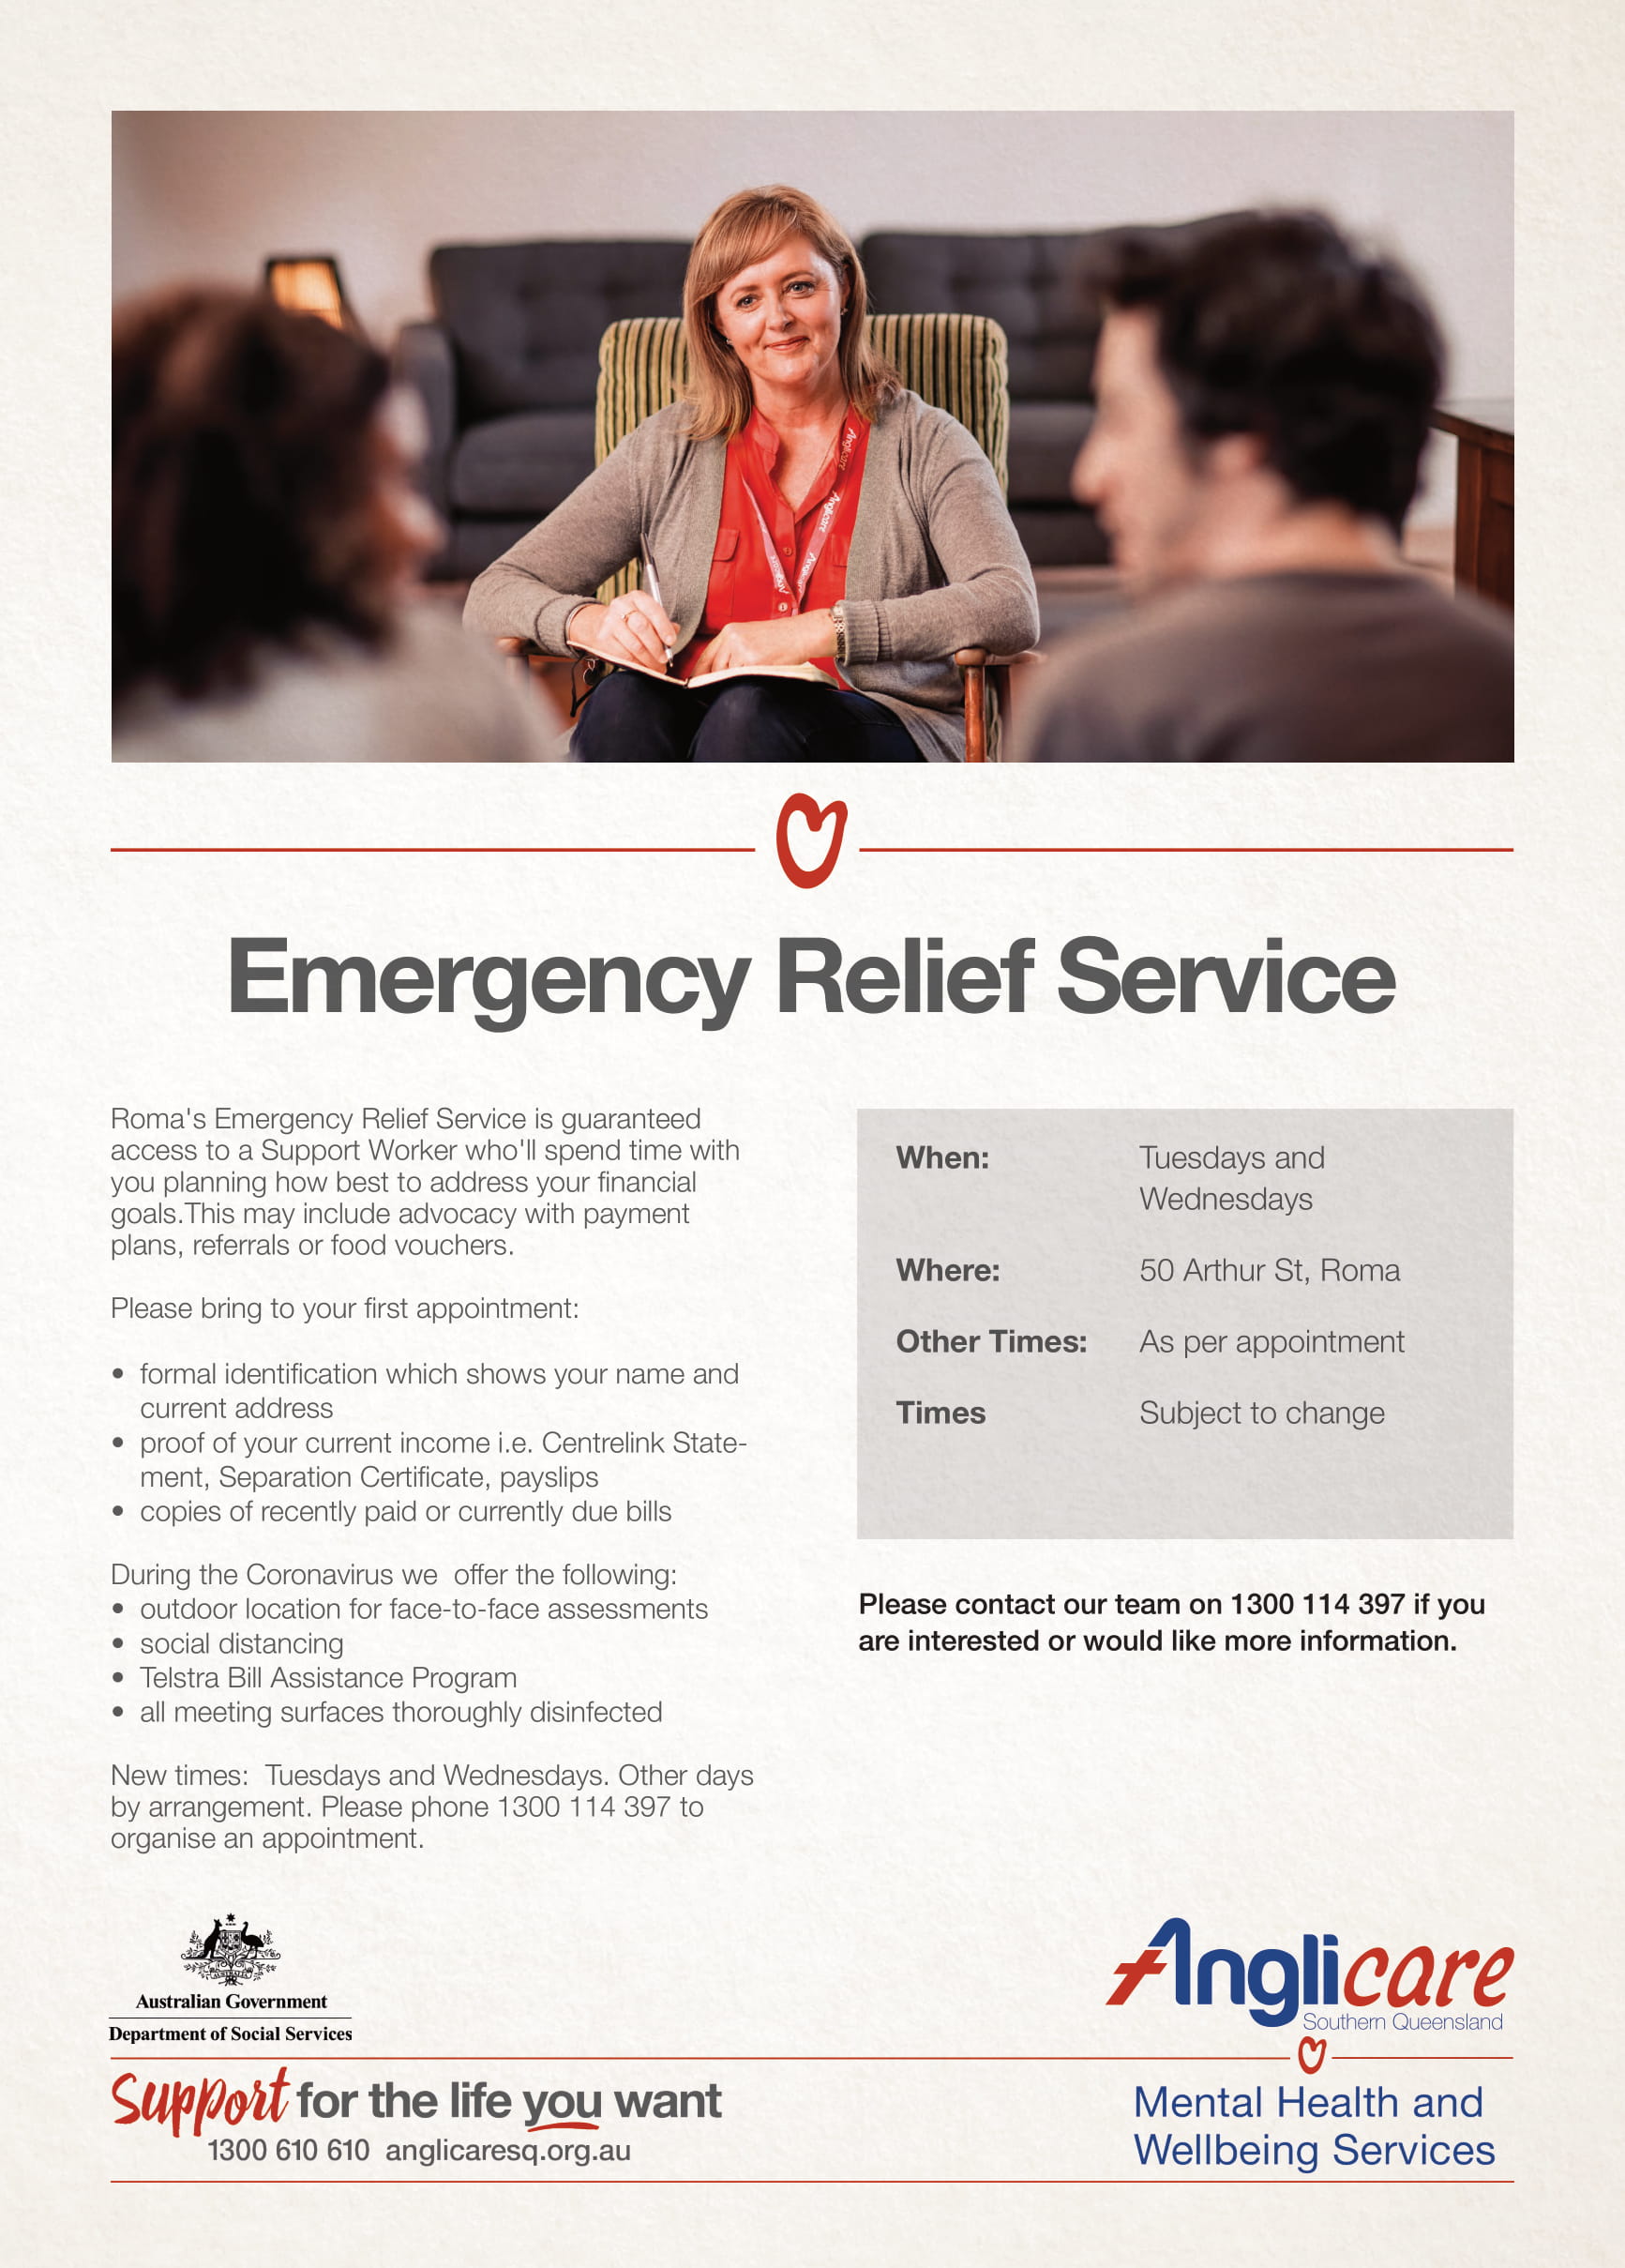 Anglicare Southern Queensland – Emergency Relief Service